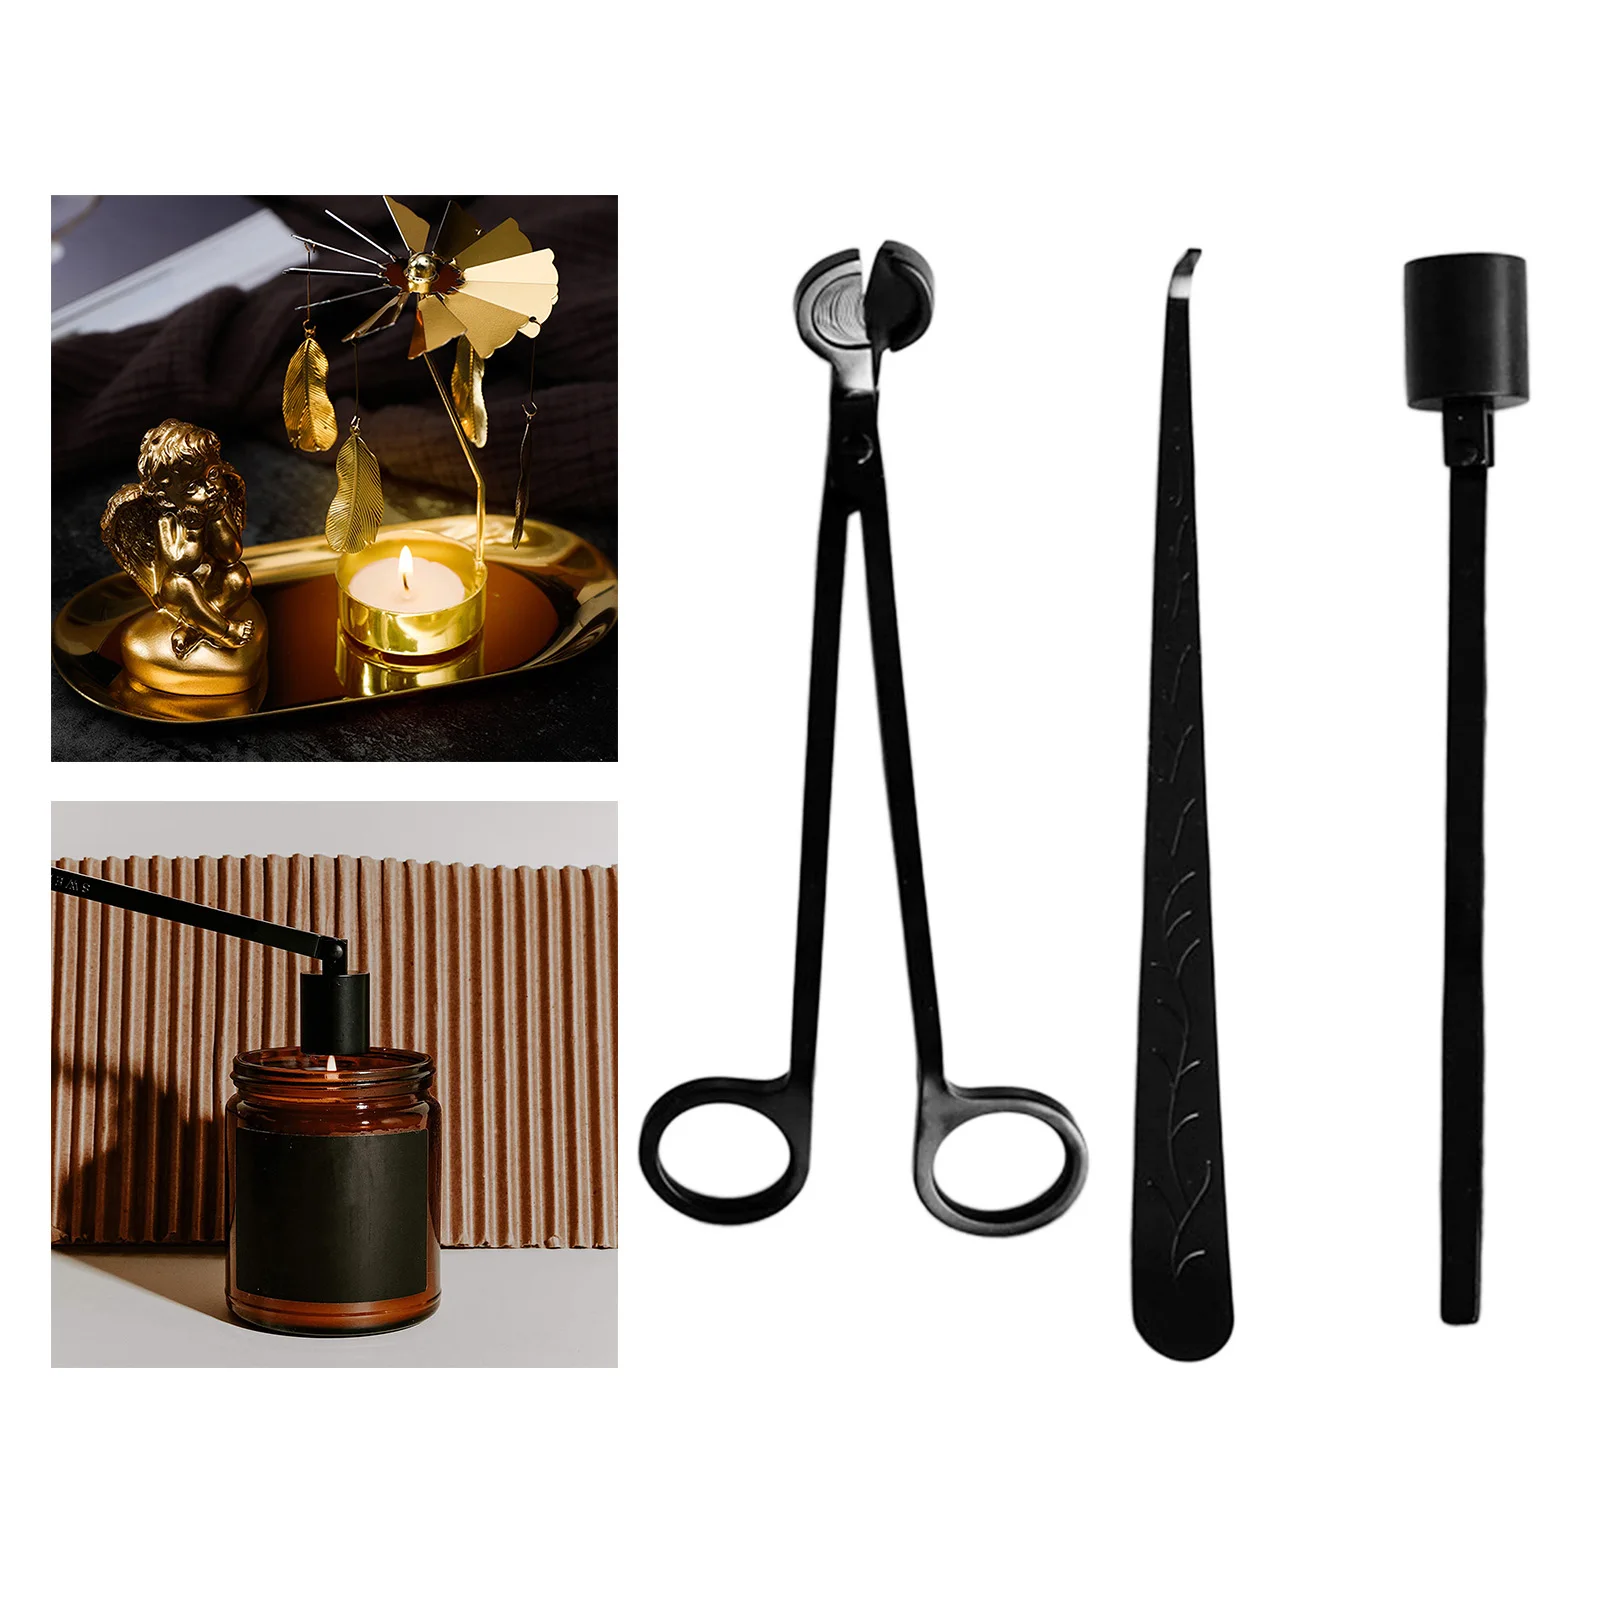 3Pcs/Set Candle Accessory Set Candle Extinguish Tool Candle Wick Snuffer Trimmer Dipper Tools Kit For Home Party Wedding Supply